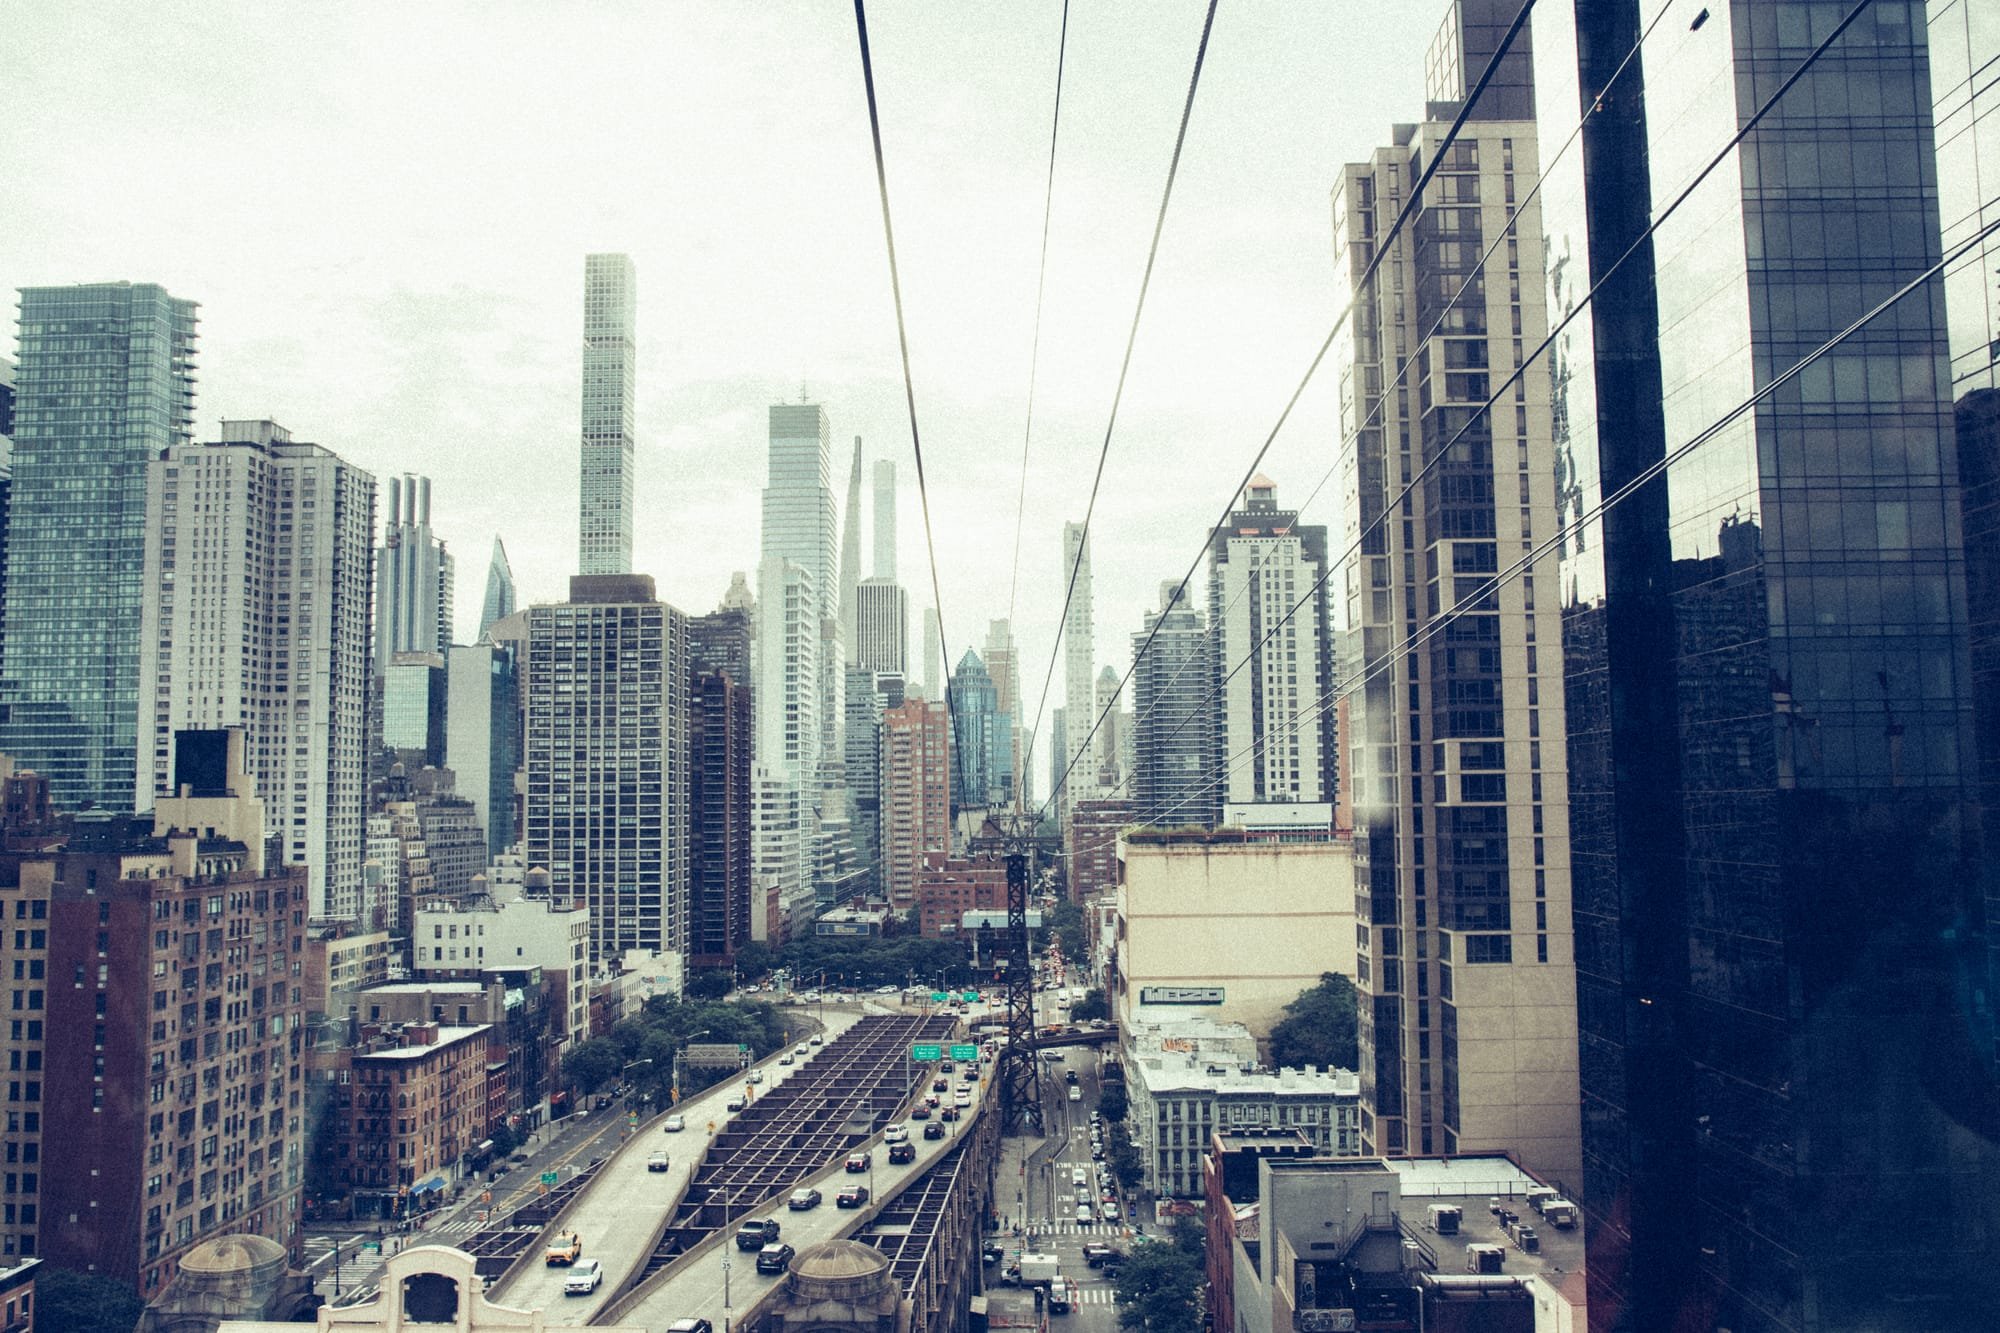 MANHATTAN NYC VIEW FROM ROOSEVELT ISLAND TRAMWAY | BLUE RETRO STYLE